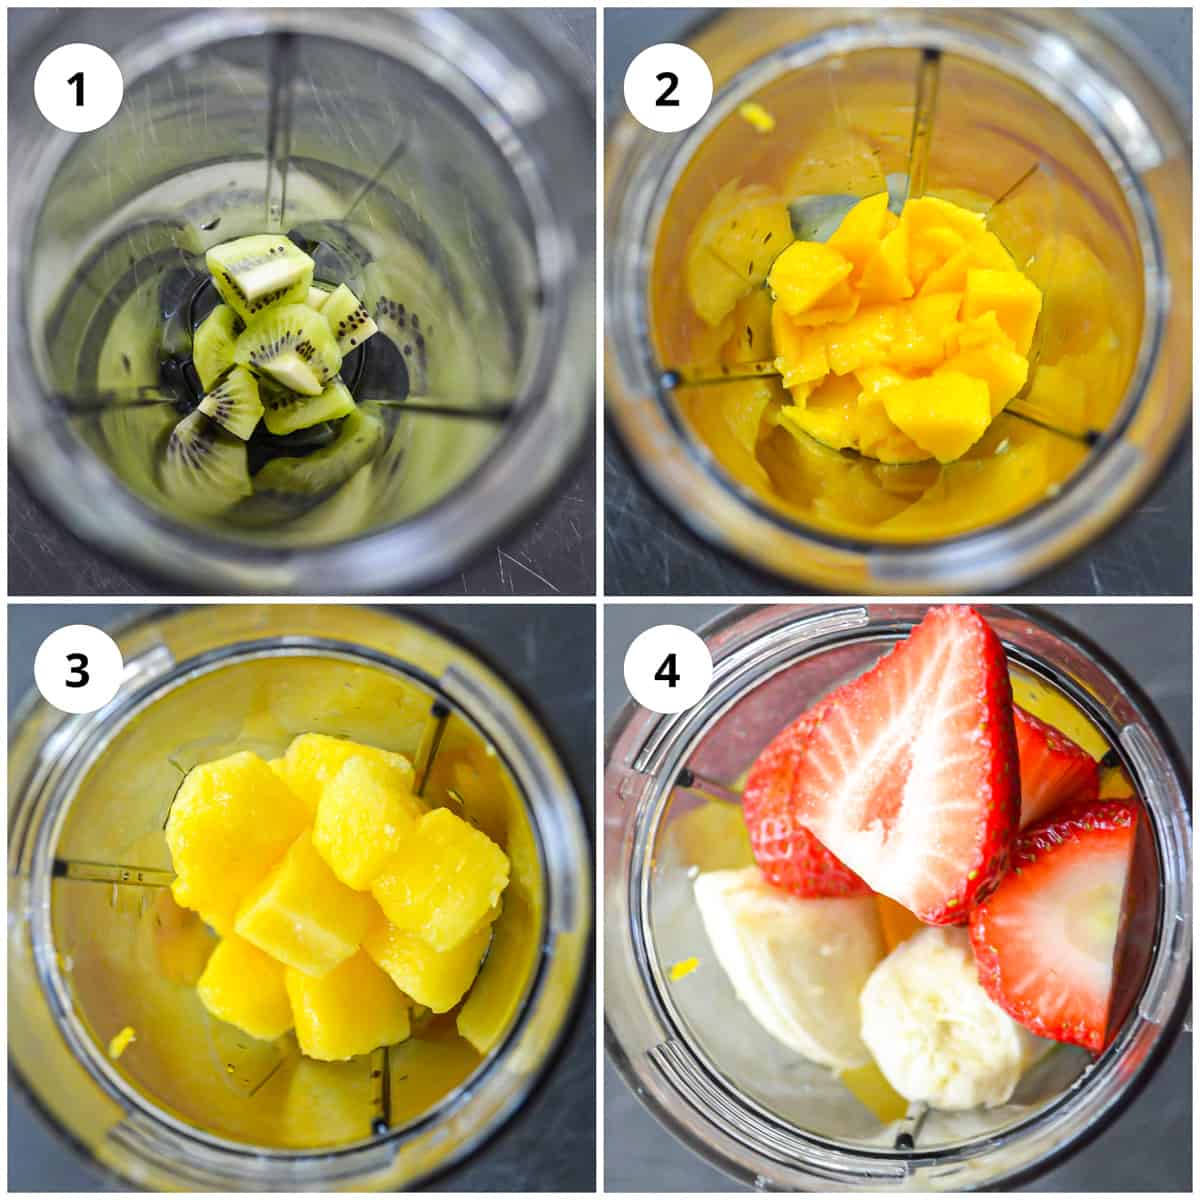 Photos to show how to make the smoothie